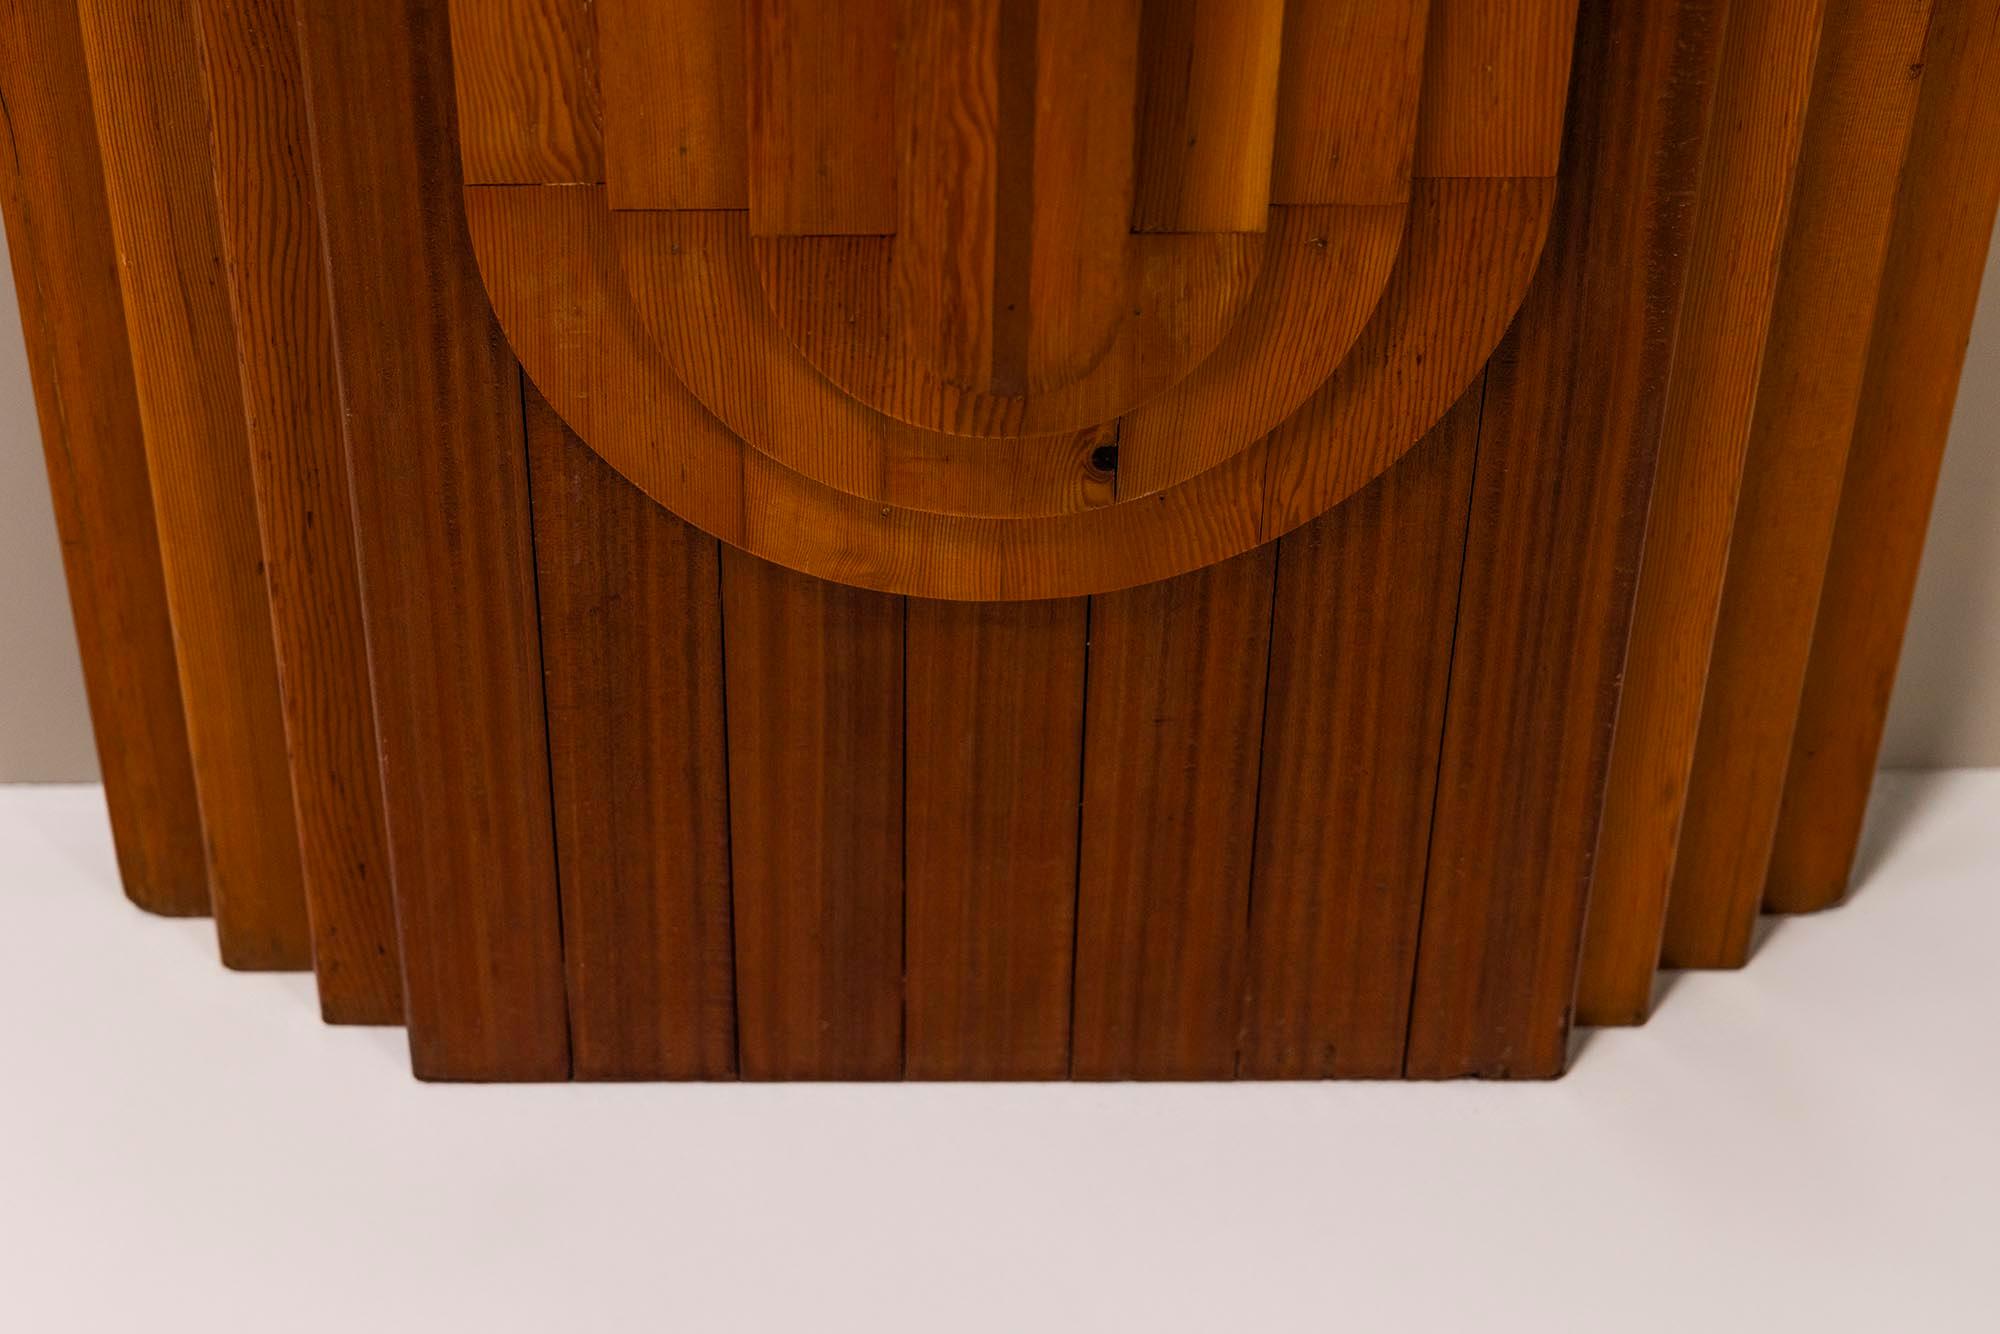 Italian Large Sculptural Brutalist Wall Panel in Teak and Pine, Italy 1970s For Sale